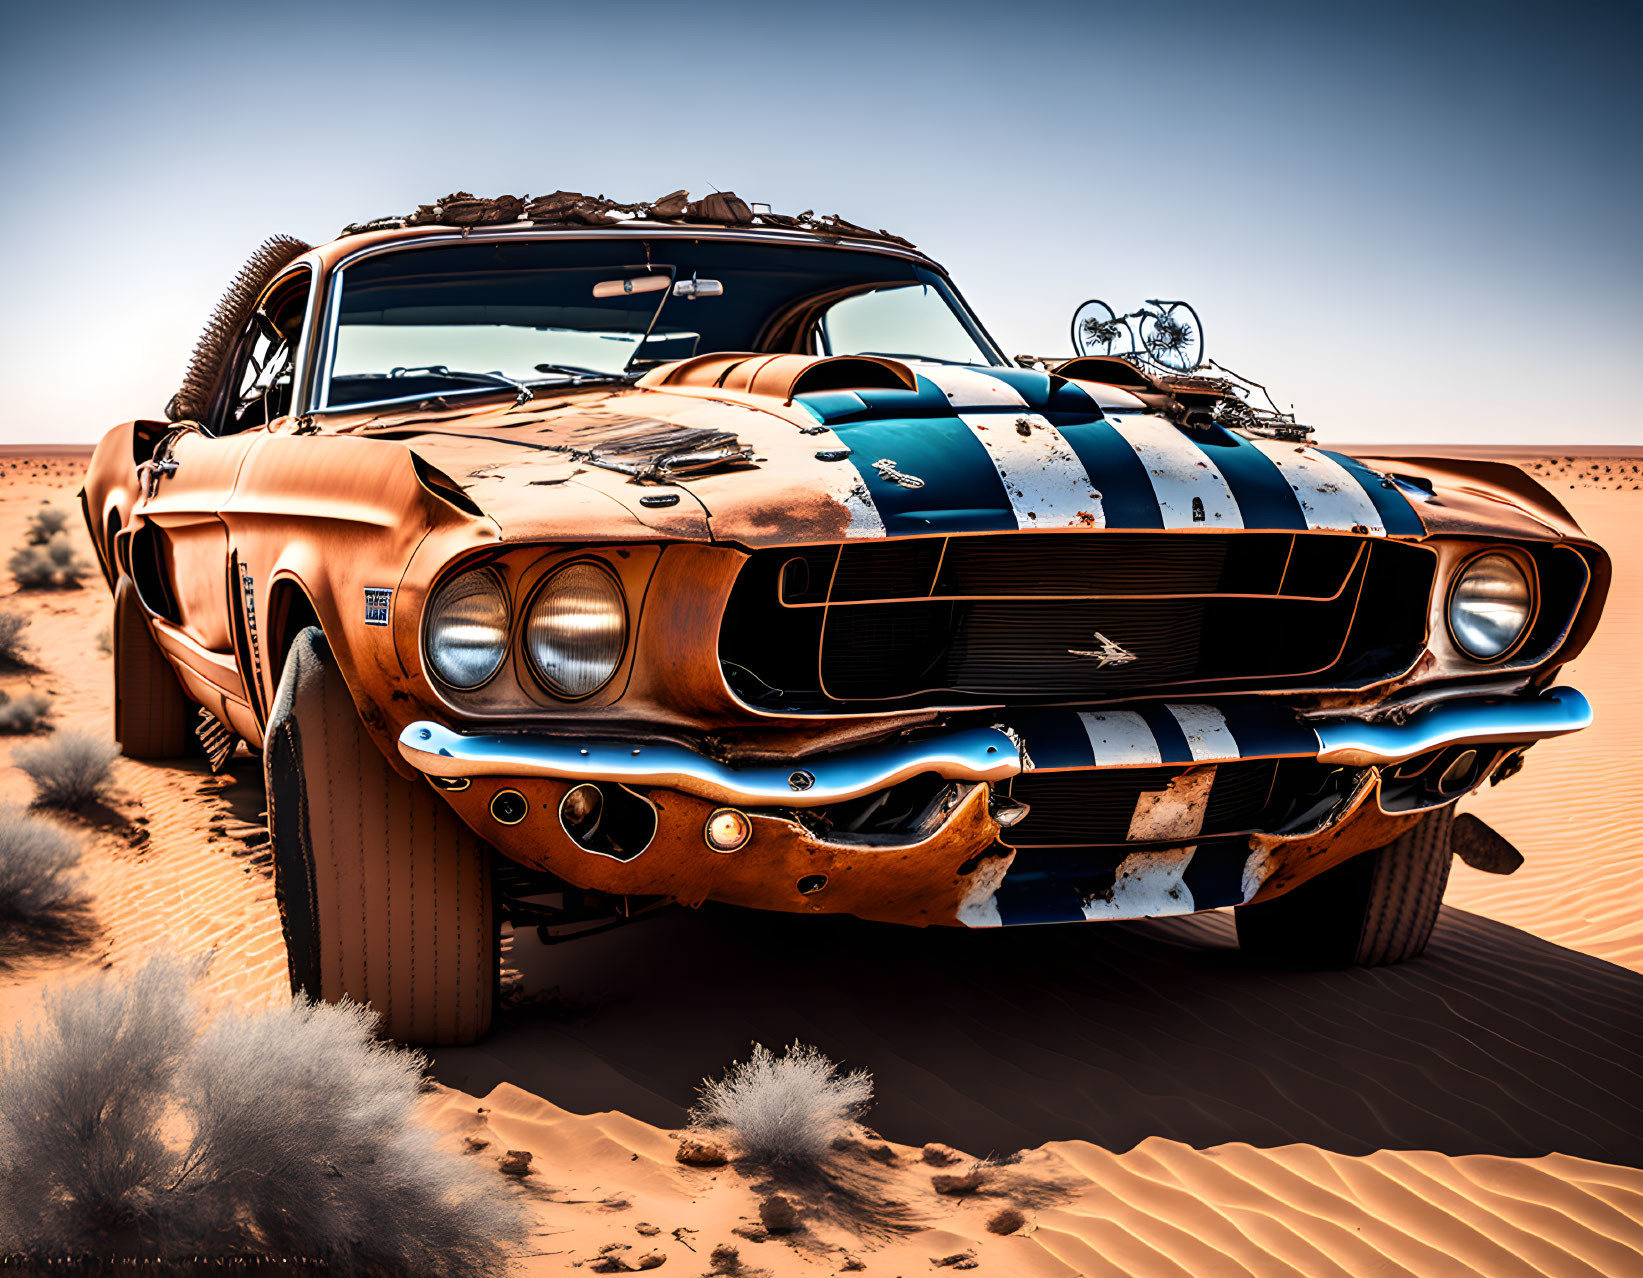 old Mustang Shelby car in the middle of a desert